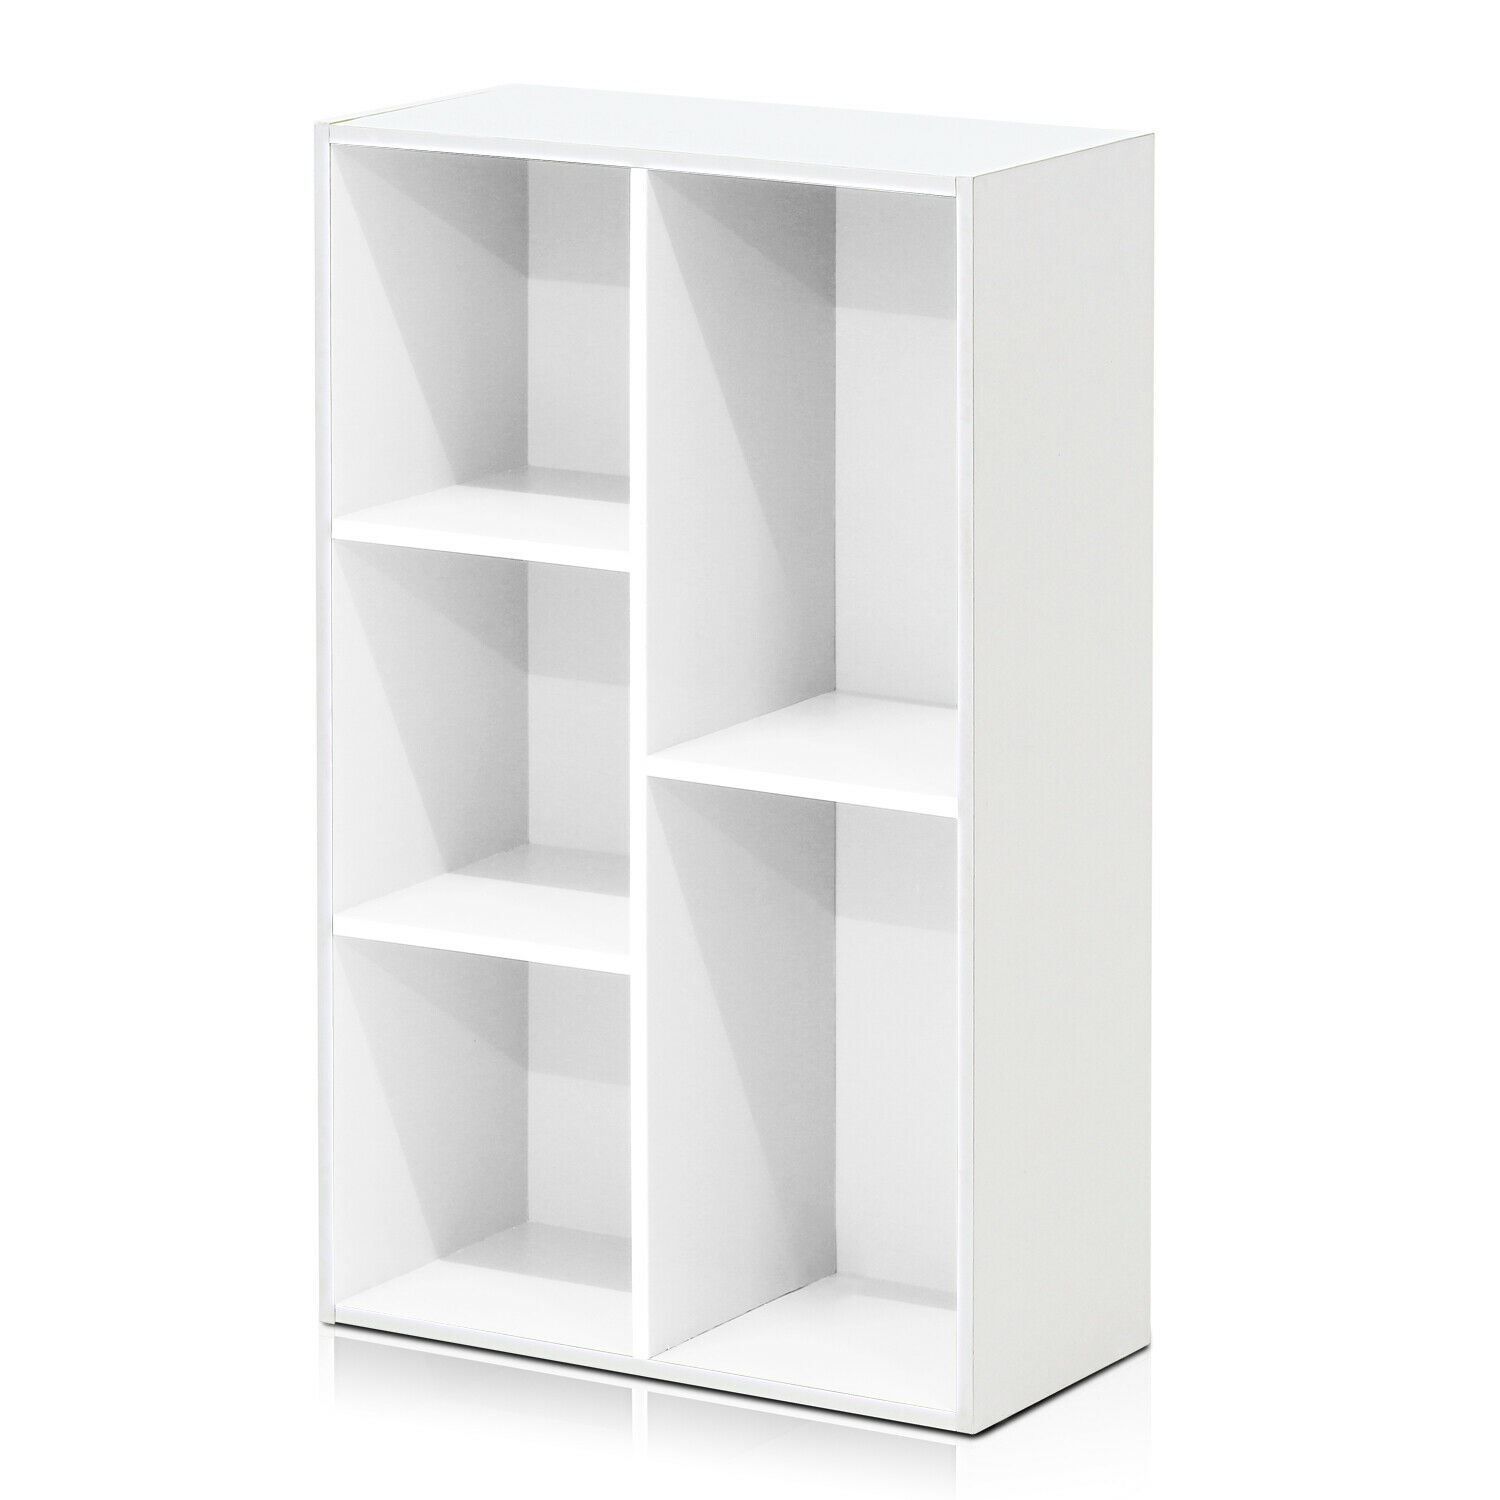 - Furinno 11069 5 cube open shelf features simplicity and easy blend in with any home decor. 
- It offers multiple colors to create your own storage space and also enhances your home.
- This series is made of E1 particle board and manufactured in Malaysia.
- There is no foul smell, durable and the material is stable.
- Care instructions: wipe clean with clean damped cloth. Avoid using harsh chemicals.